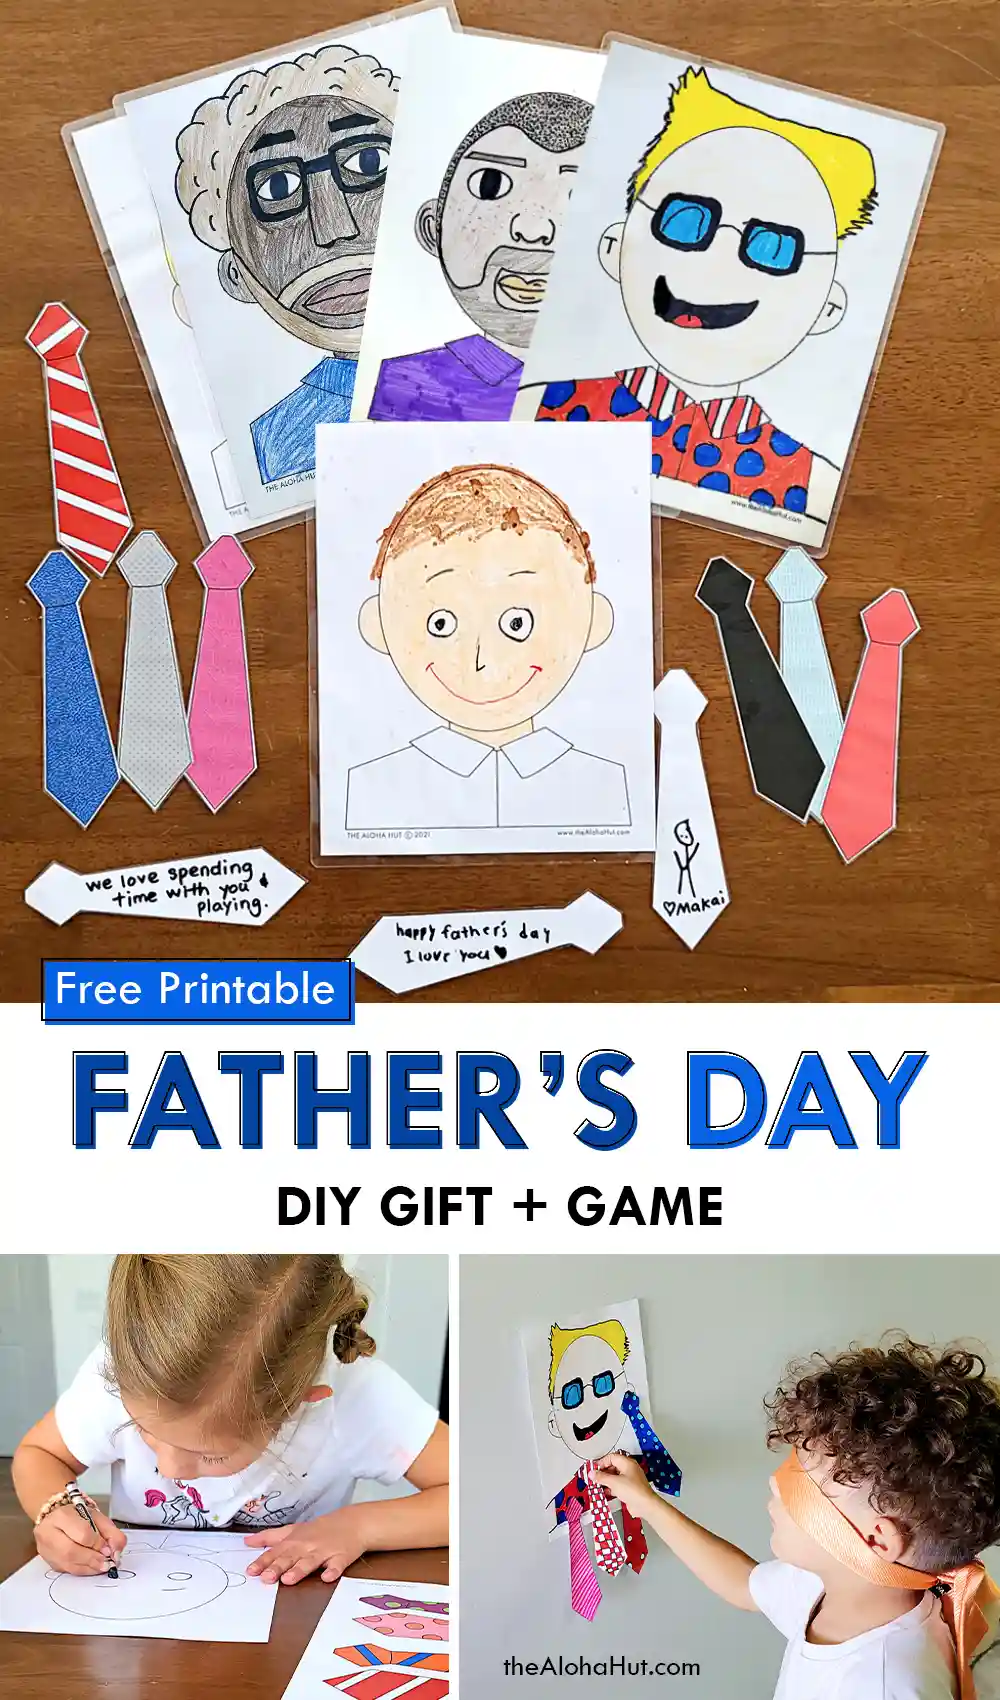 Father's Day drawings and tie cards for dad. Easy Father's Day gift ideas for the kids to give to dad or grandpa. Print the coloring pages so the kids can draw pictures of dad and then use the ties to write messages to dad. You can even turn it into a fun scavenger hunt game for dad where he has to find all the ties. Fun craft and activity for the kids and a simple gift dad will love.